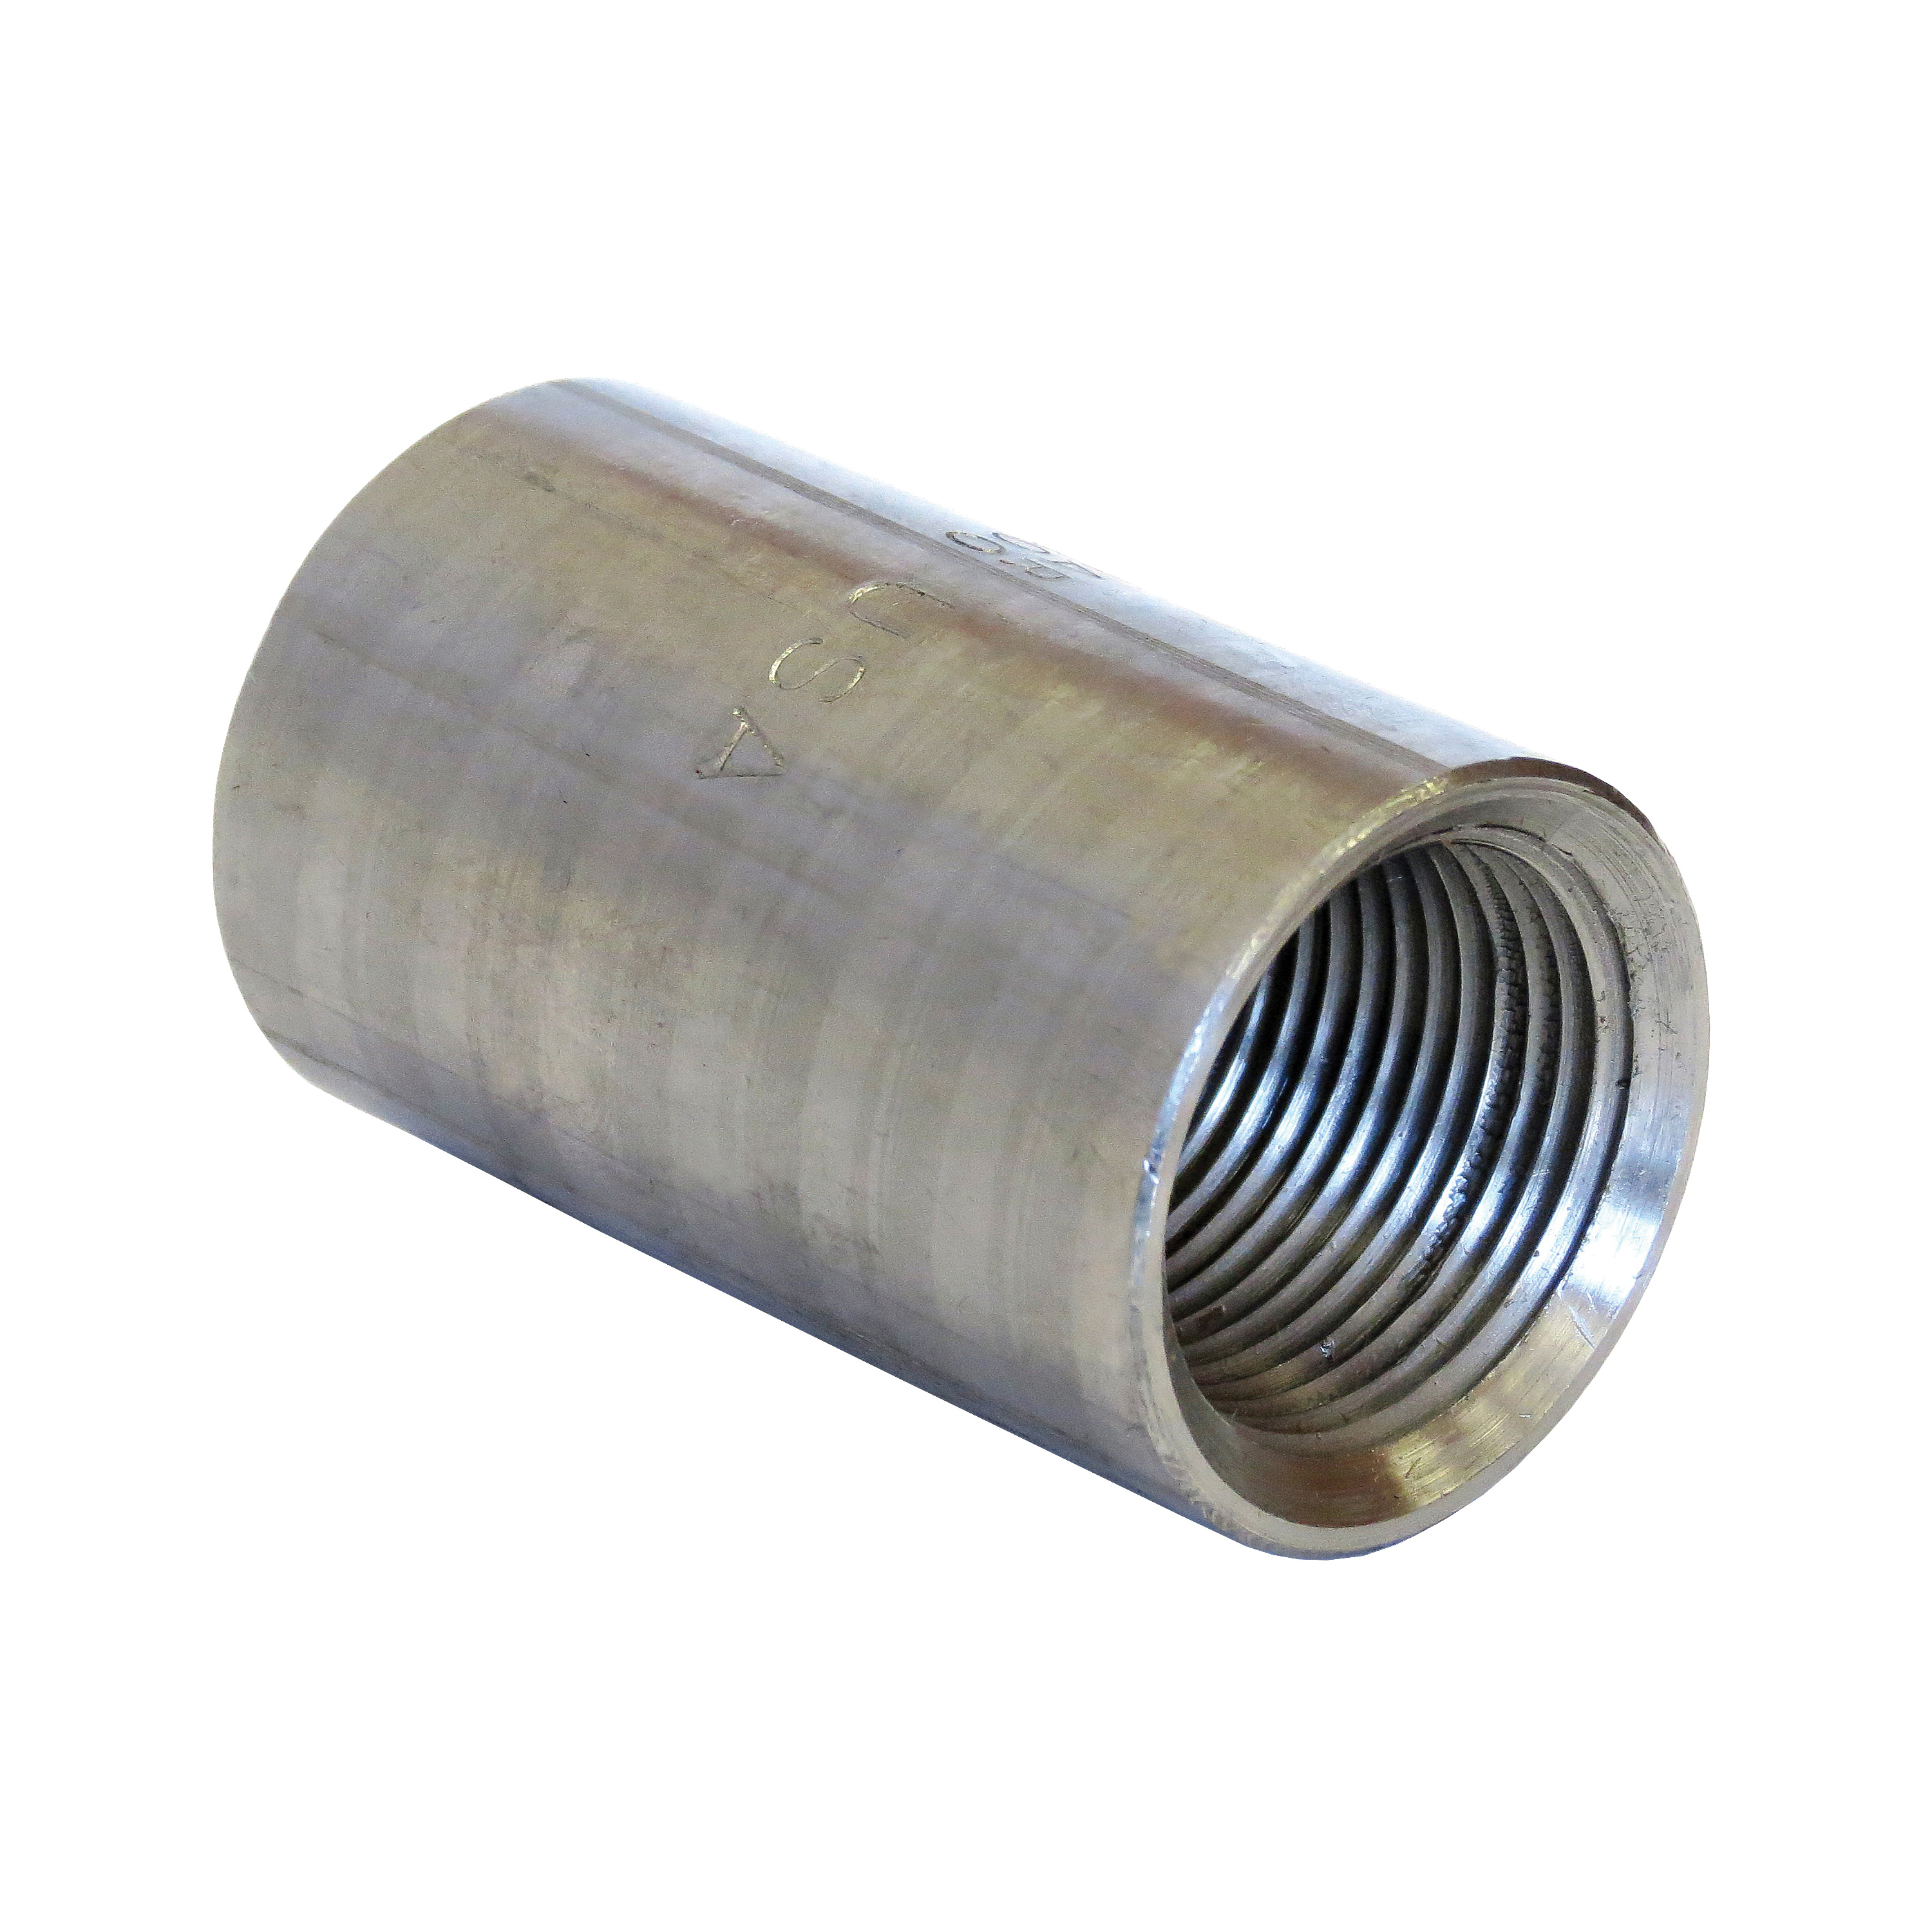 0321200461 Taper Tapped Pipe Coupling, 1/4 in, SCH 80/XH, Galvanized, Domestic